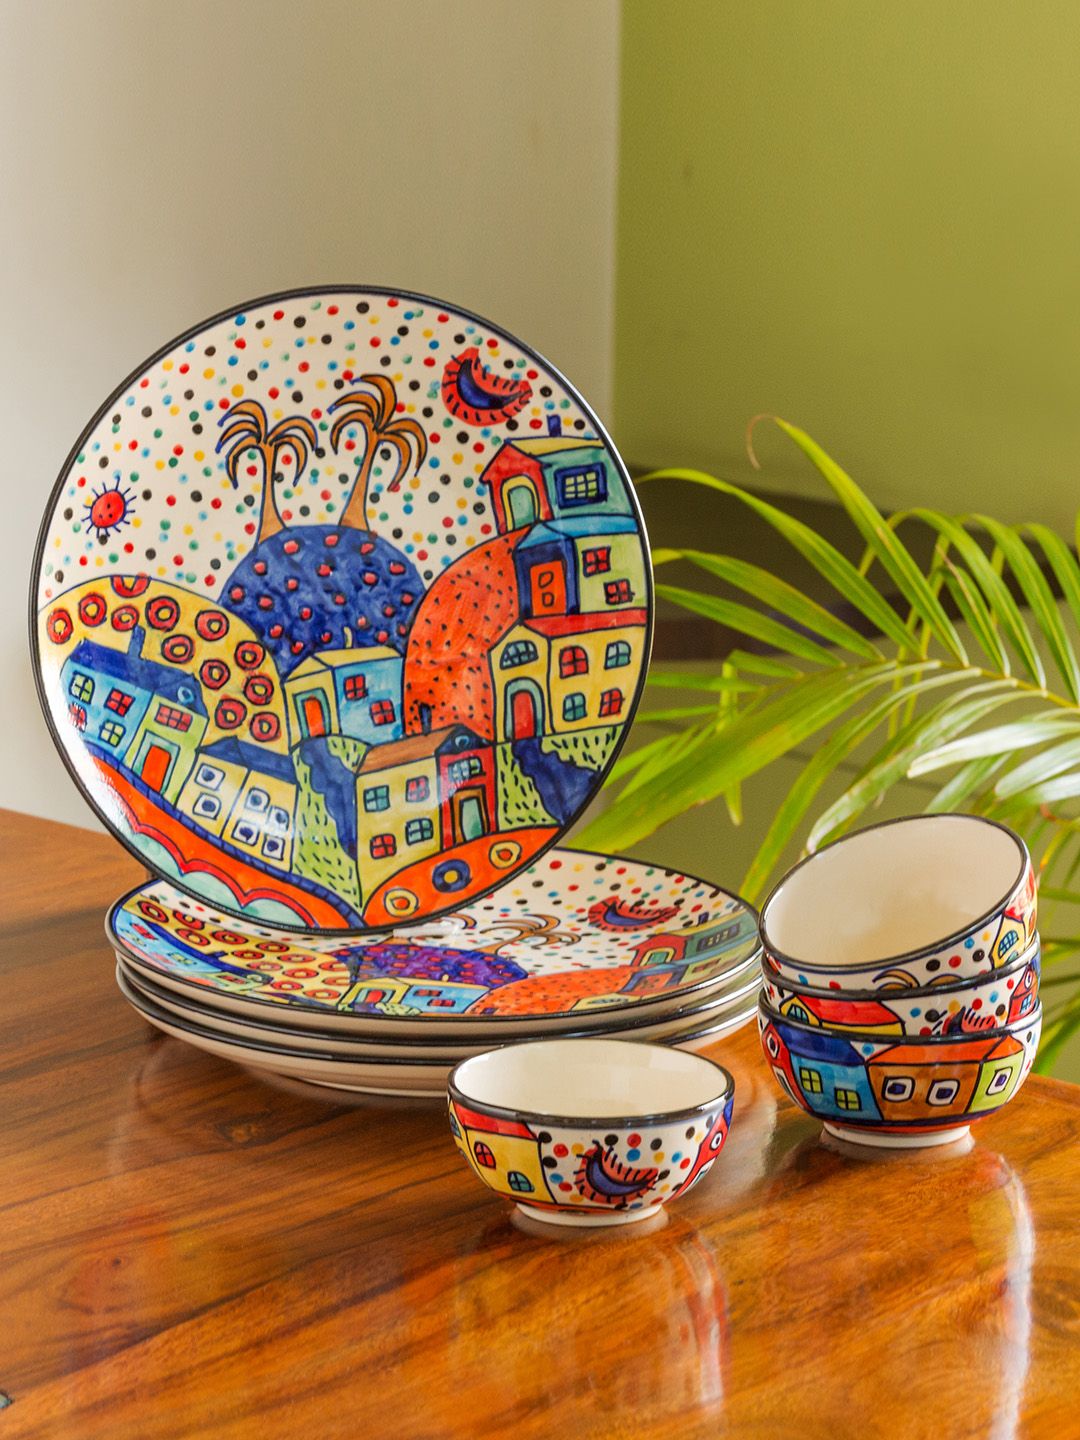 ExclusiveLane 'Hut Dining' Handpainted Ceramic Dinner Plates With Katoris (8 Pieces, Serving for 4) Price in India